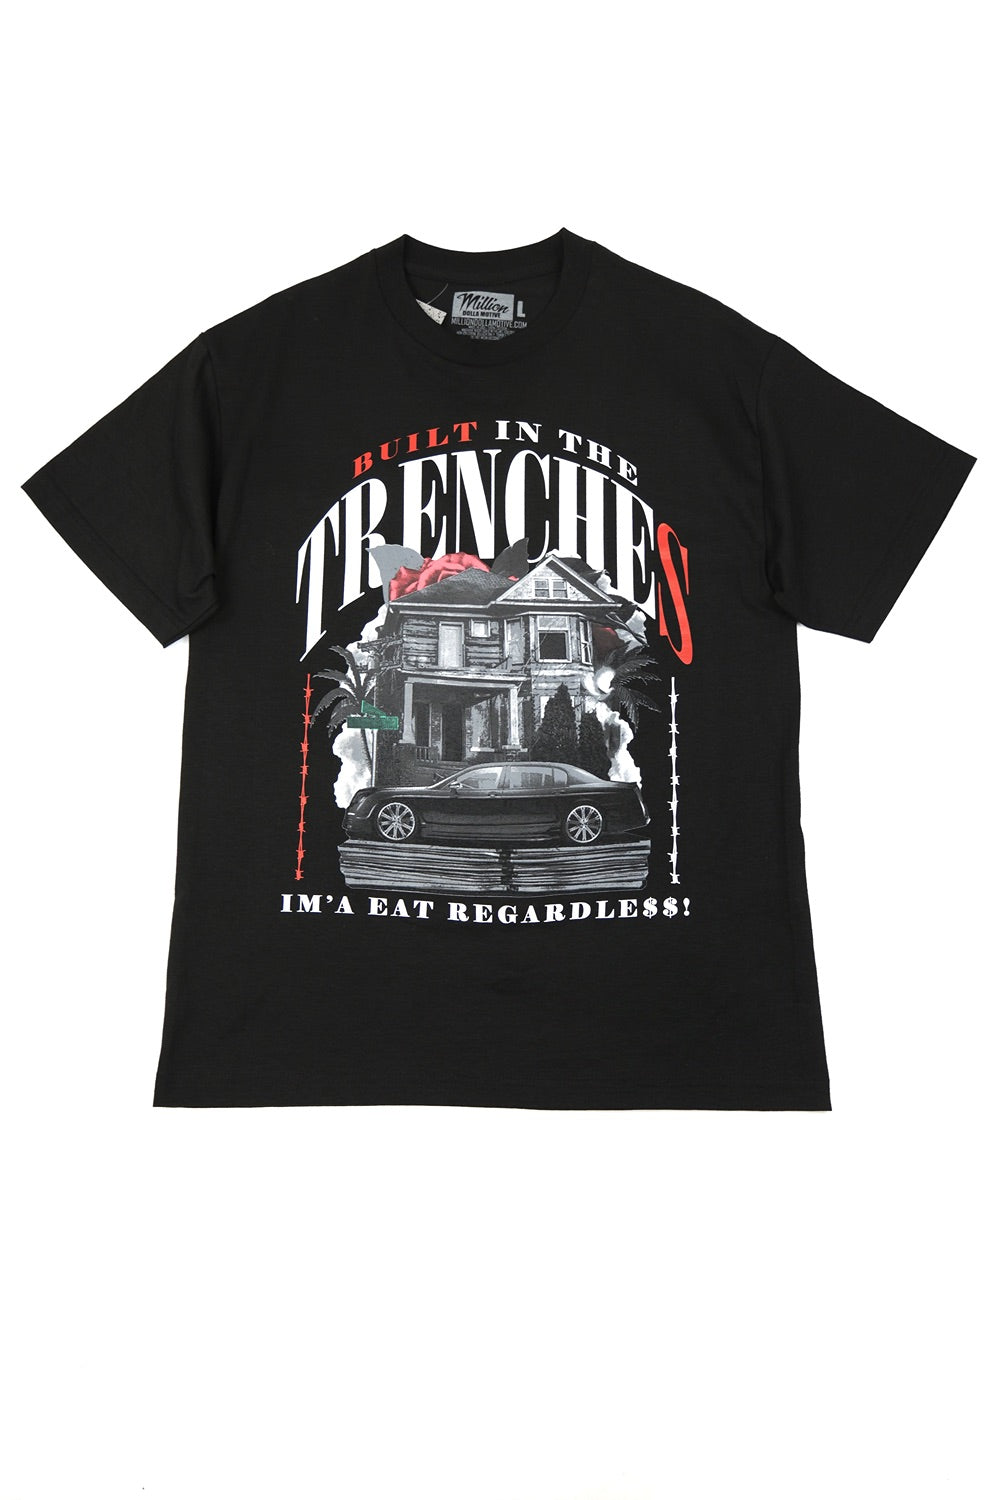 Graphic Tees - Built In The Trenches T - Shirts